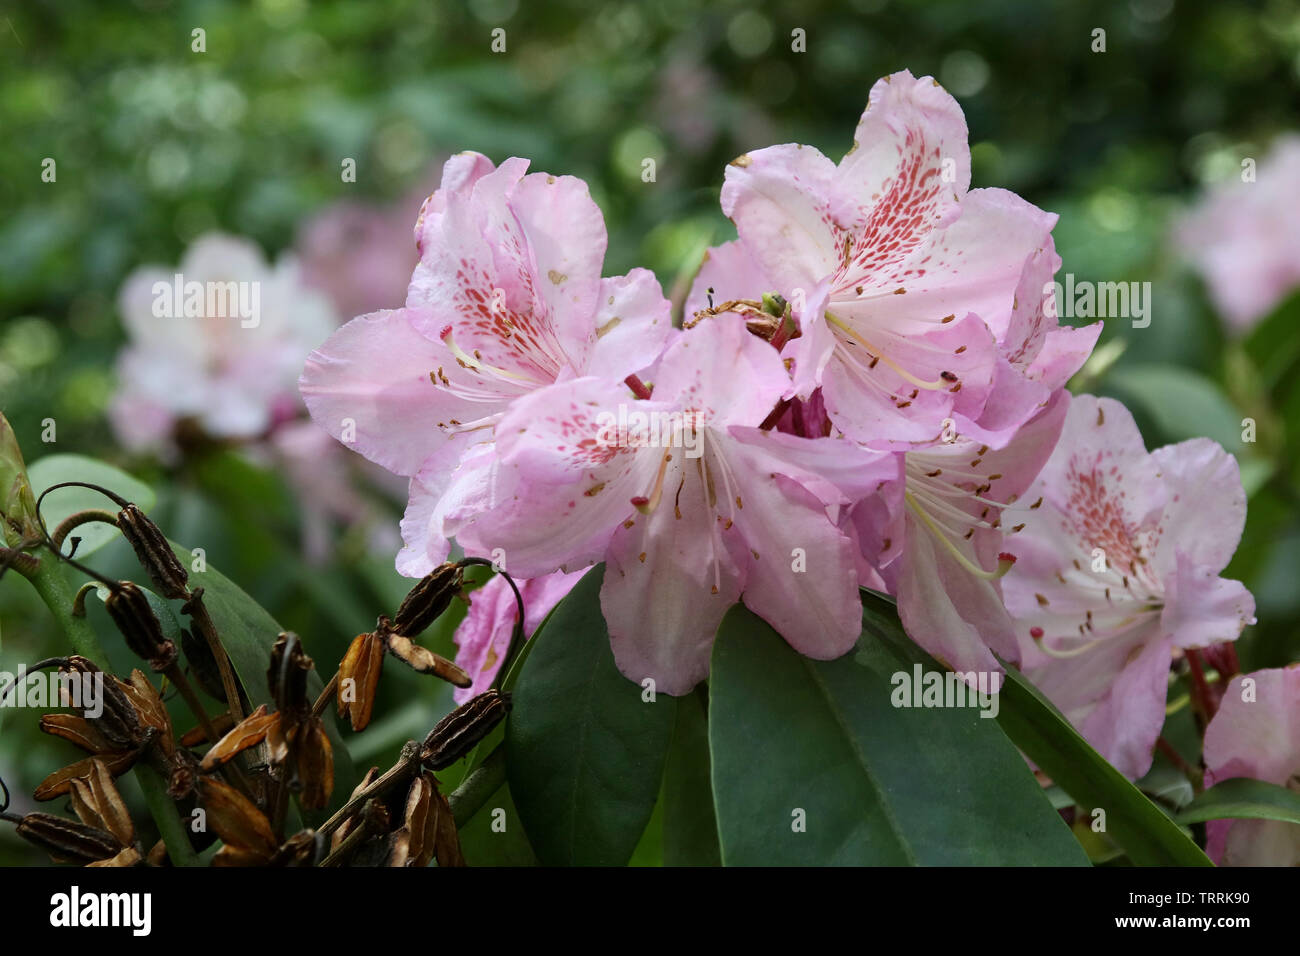 Rhododendron, Blüte, Stock Photo